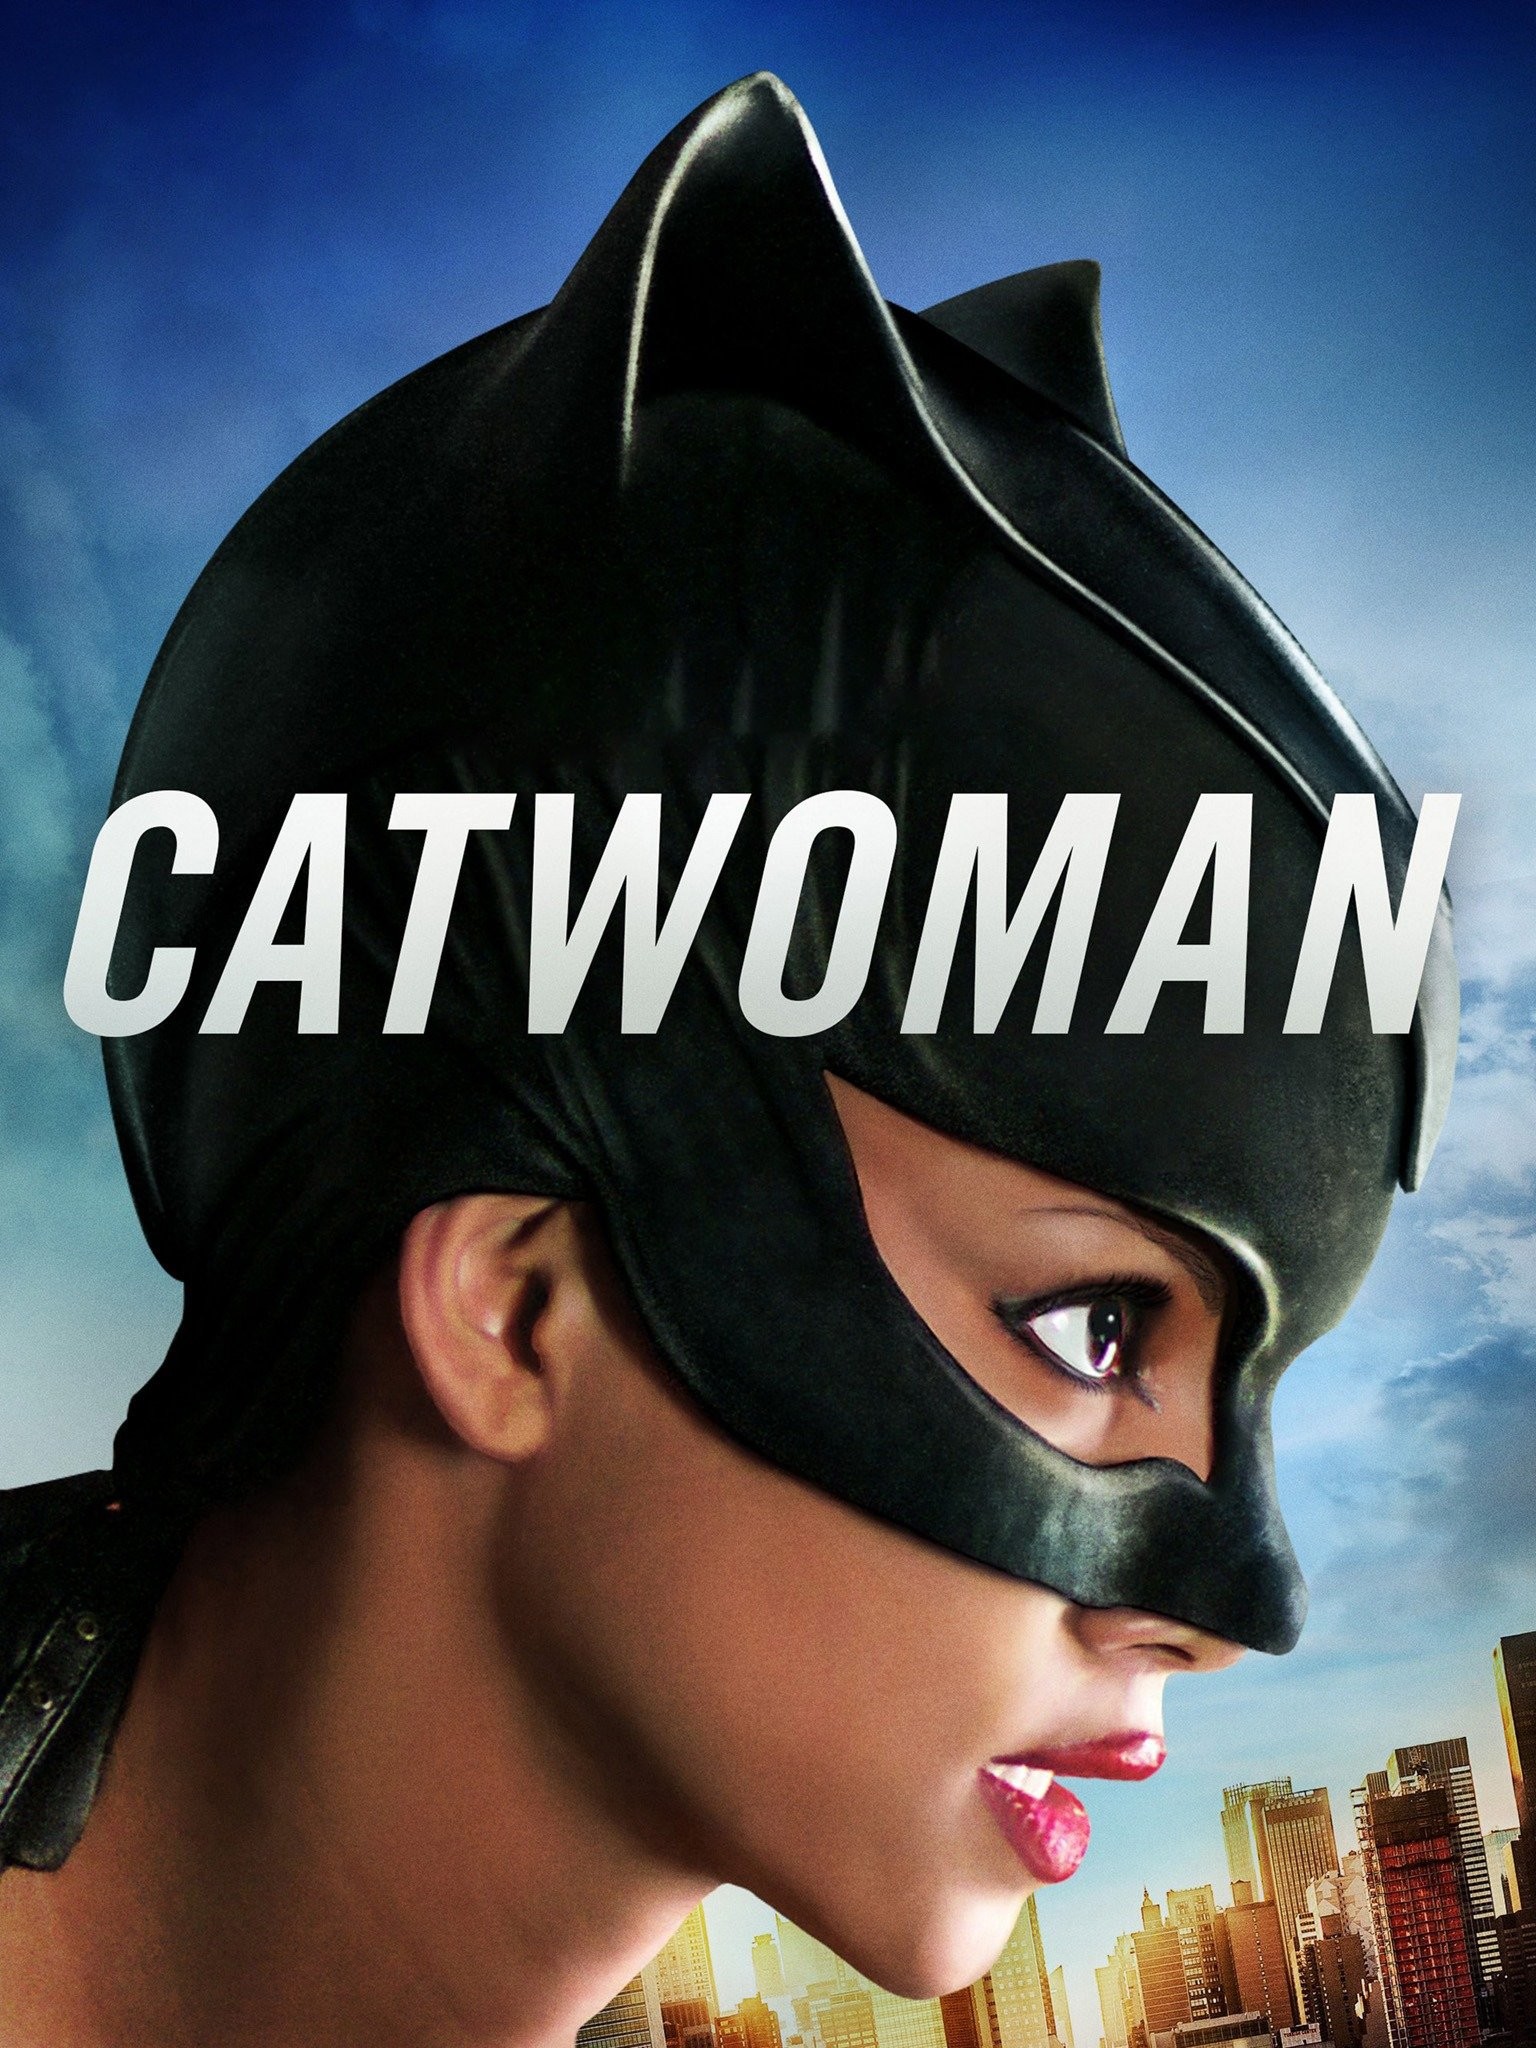 don razif recommends pictures of catwoman pic